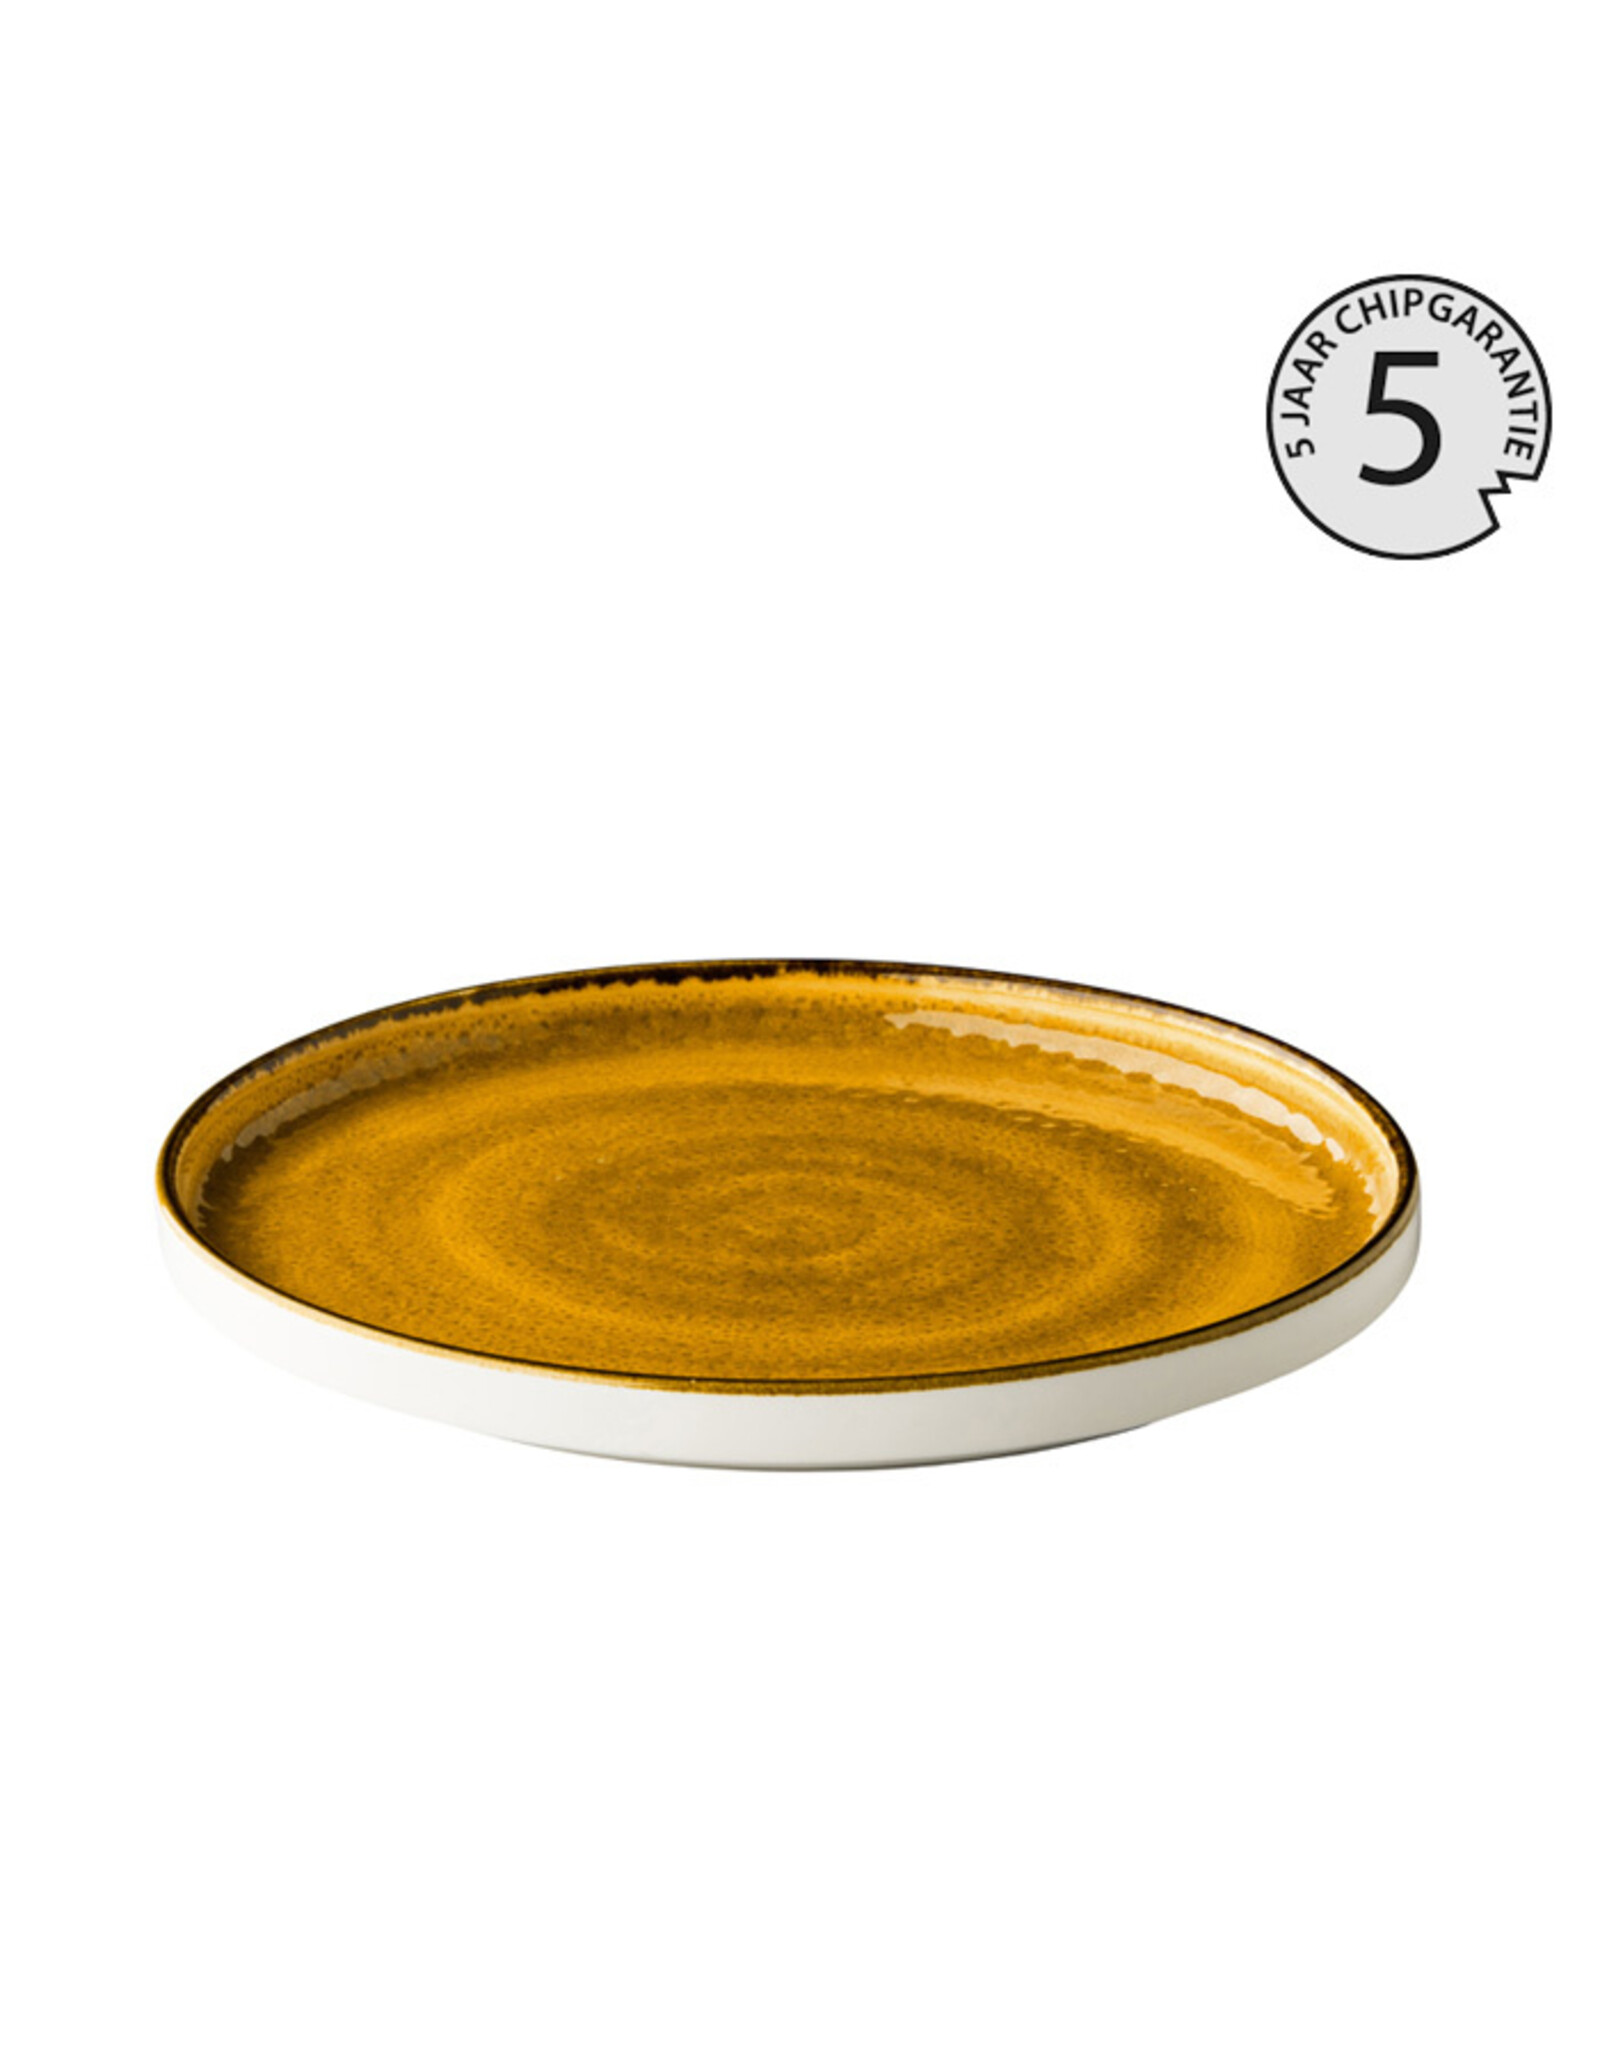 Stylepoint Jersey round plate raised edge yellow  20,4 cm stackable - 5 year chip warranty